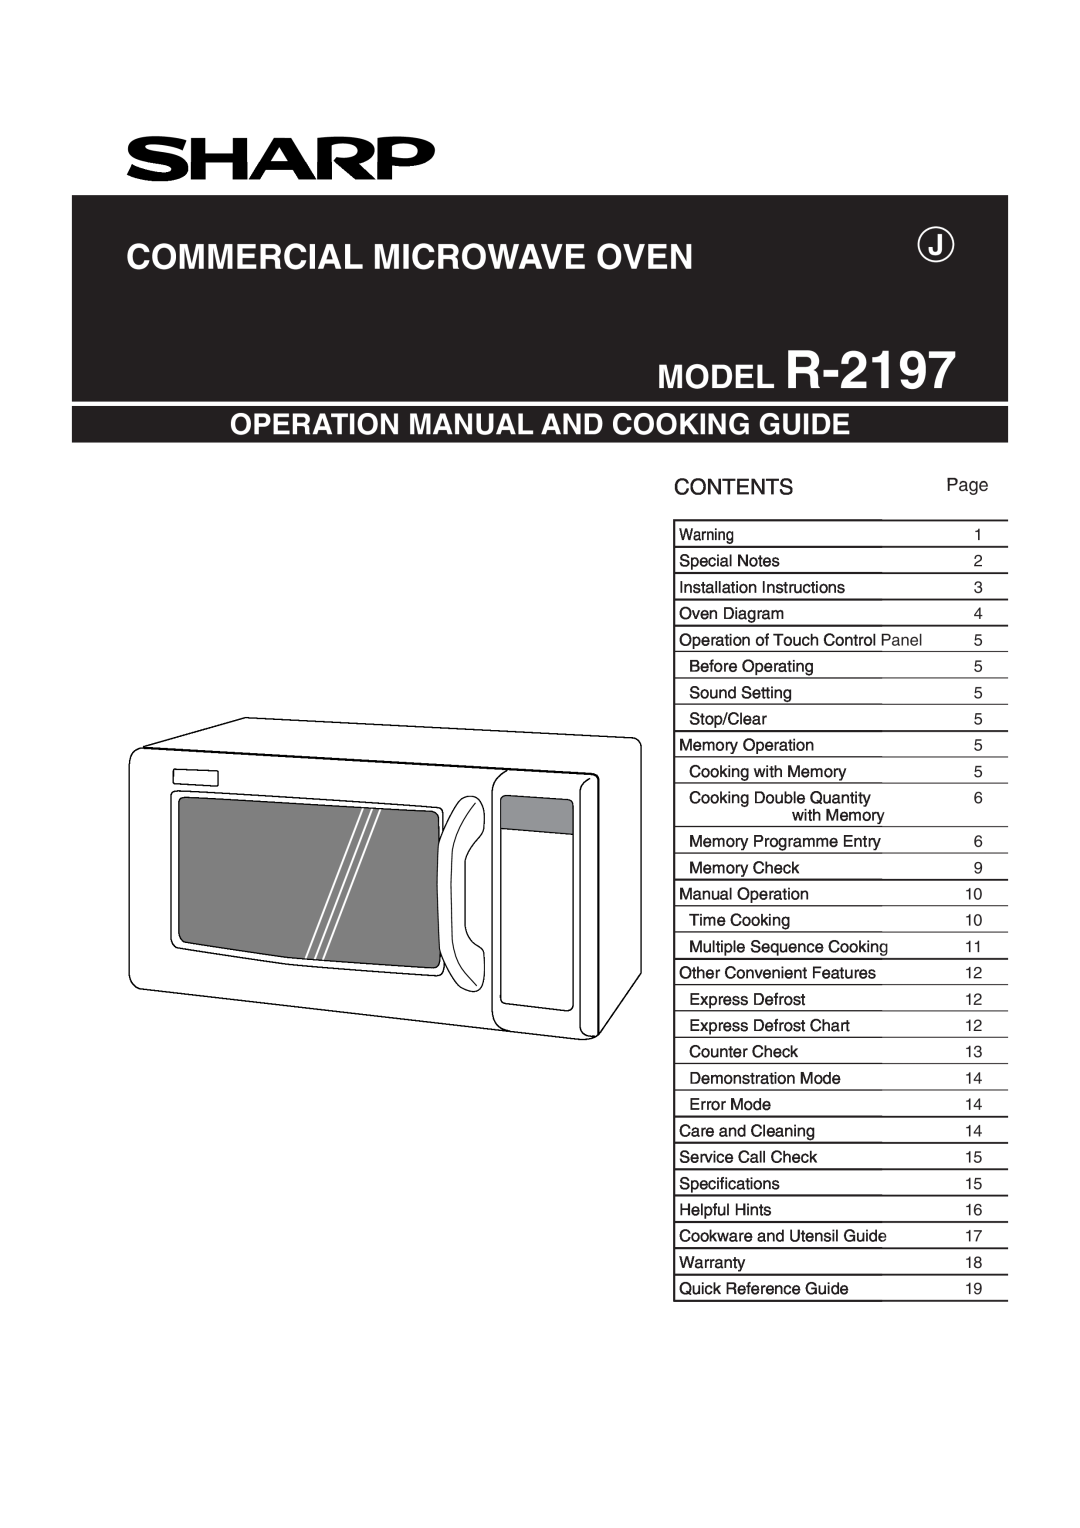 Sharp MODEL R-2197 operation manual Contents, Page, Commercial Microwave Oven 